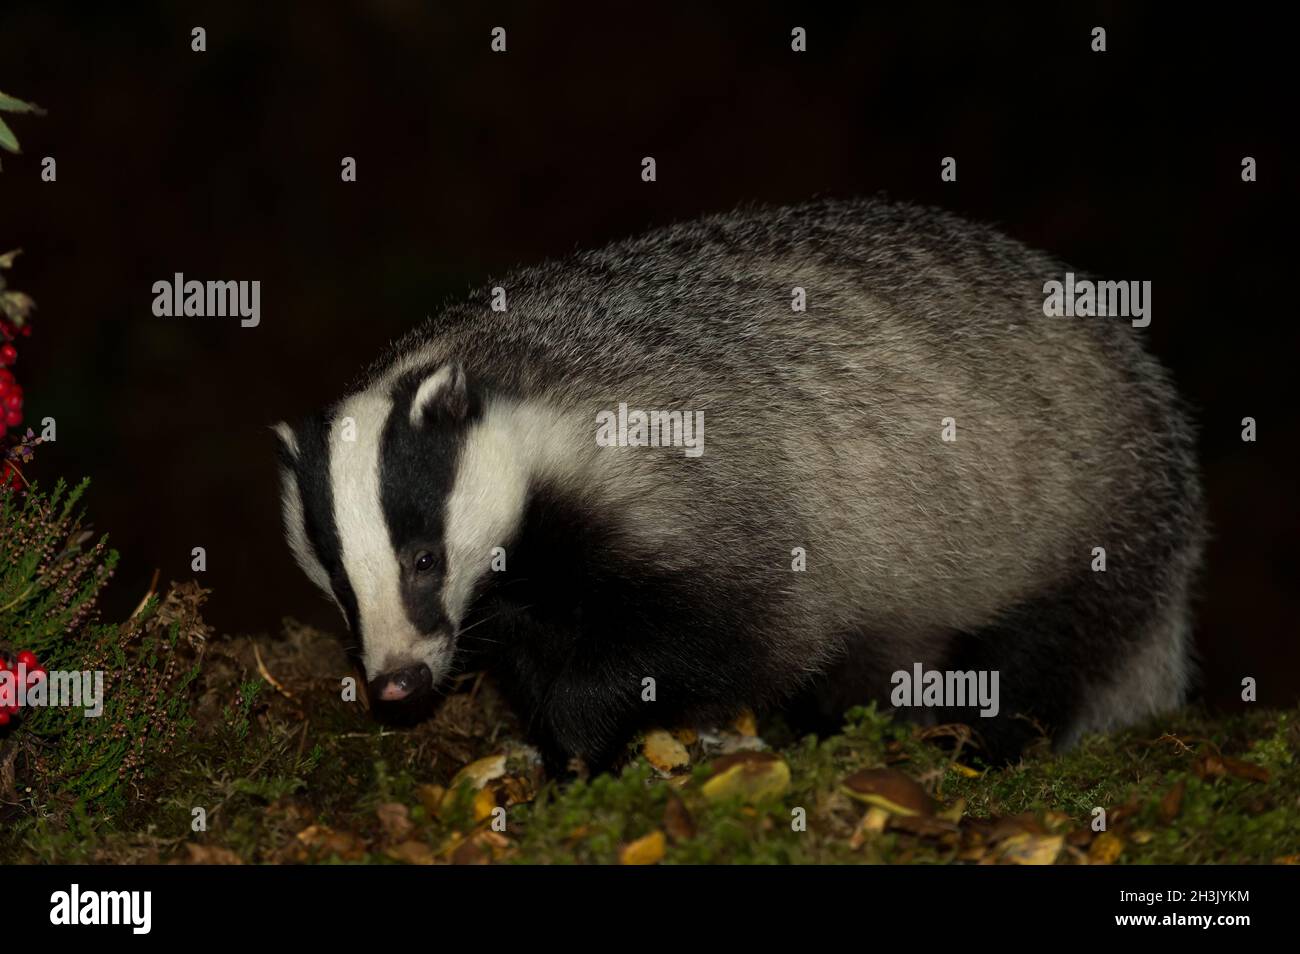 Badger, Scientific name: Meles Meles.  Wild, Eurasian badger foraging in Glen Strathfarrar, Highlands of Scotland at night with red rowan berries and Stock Photo